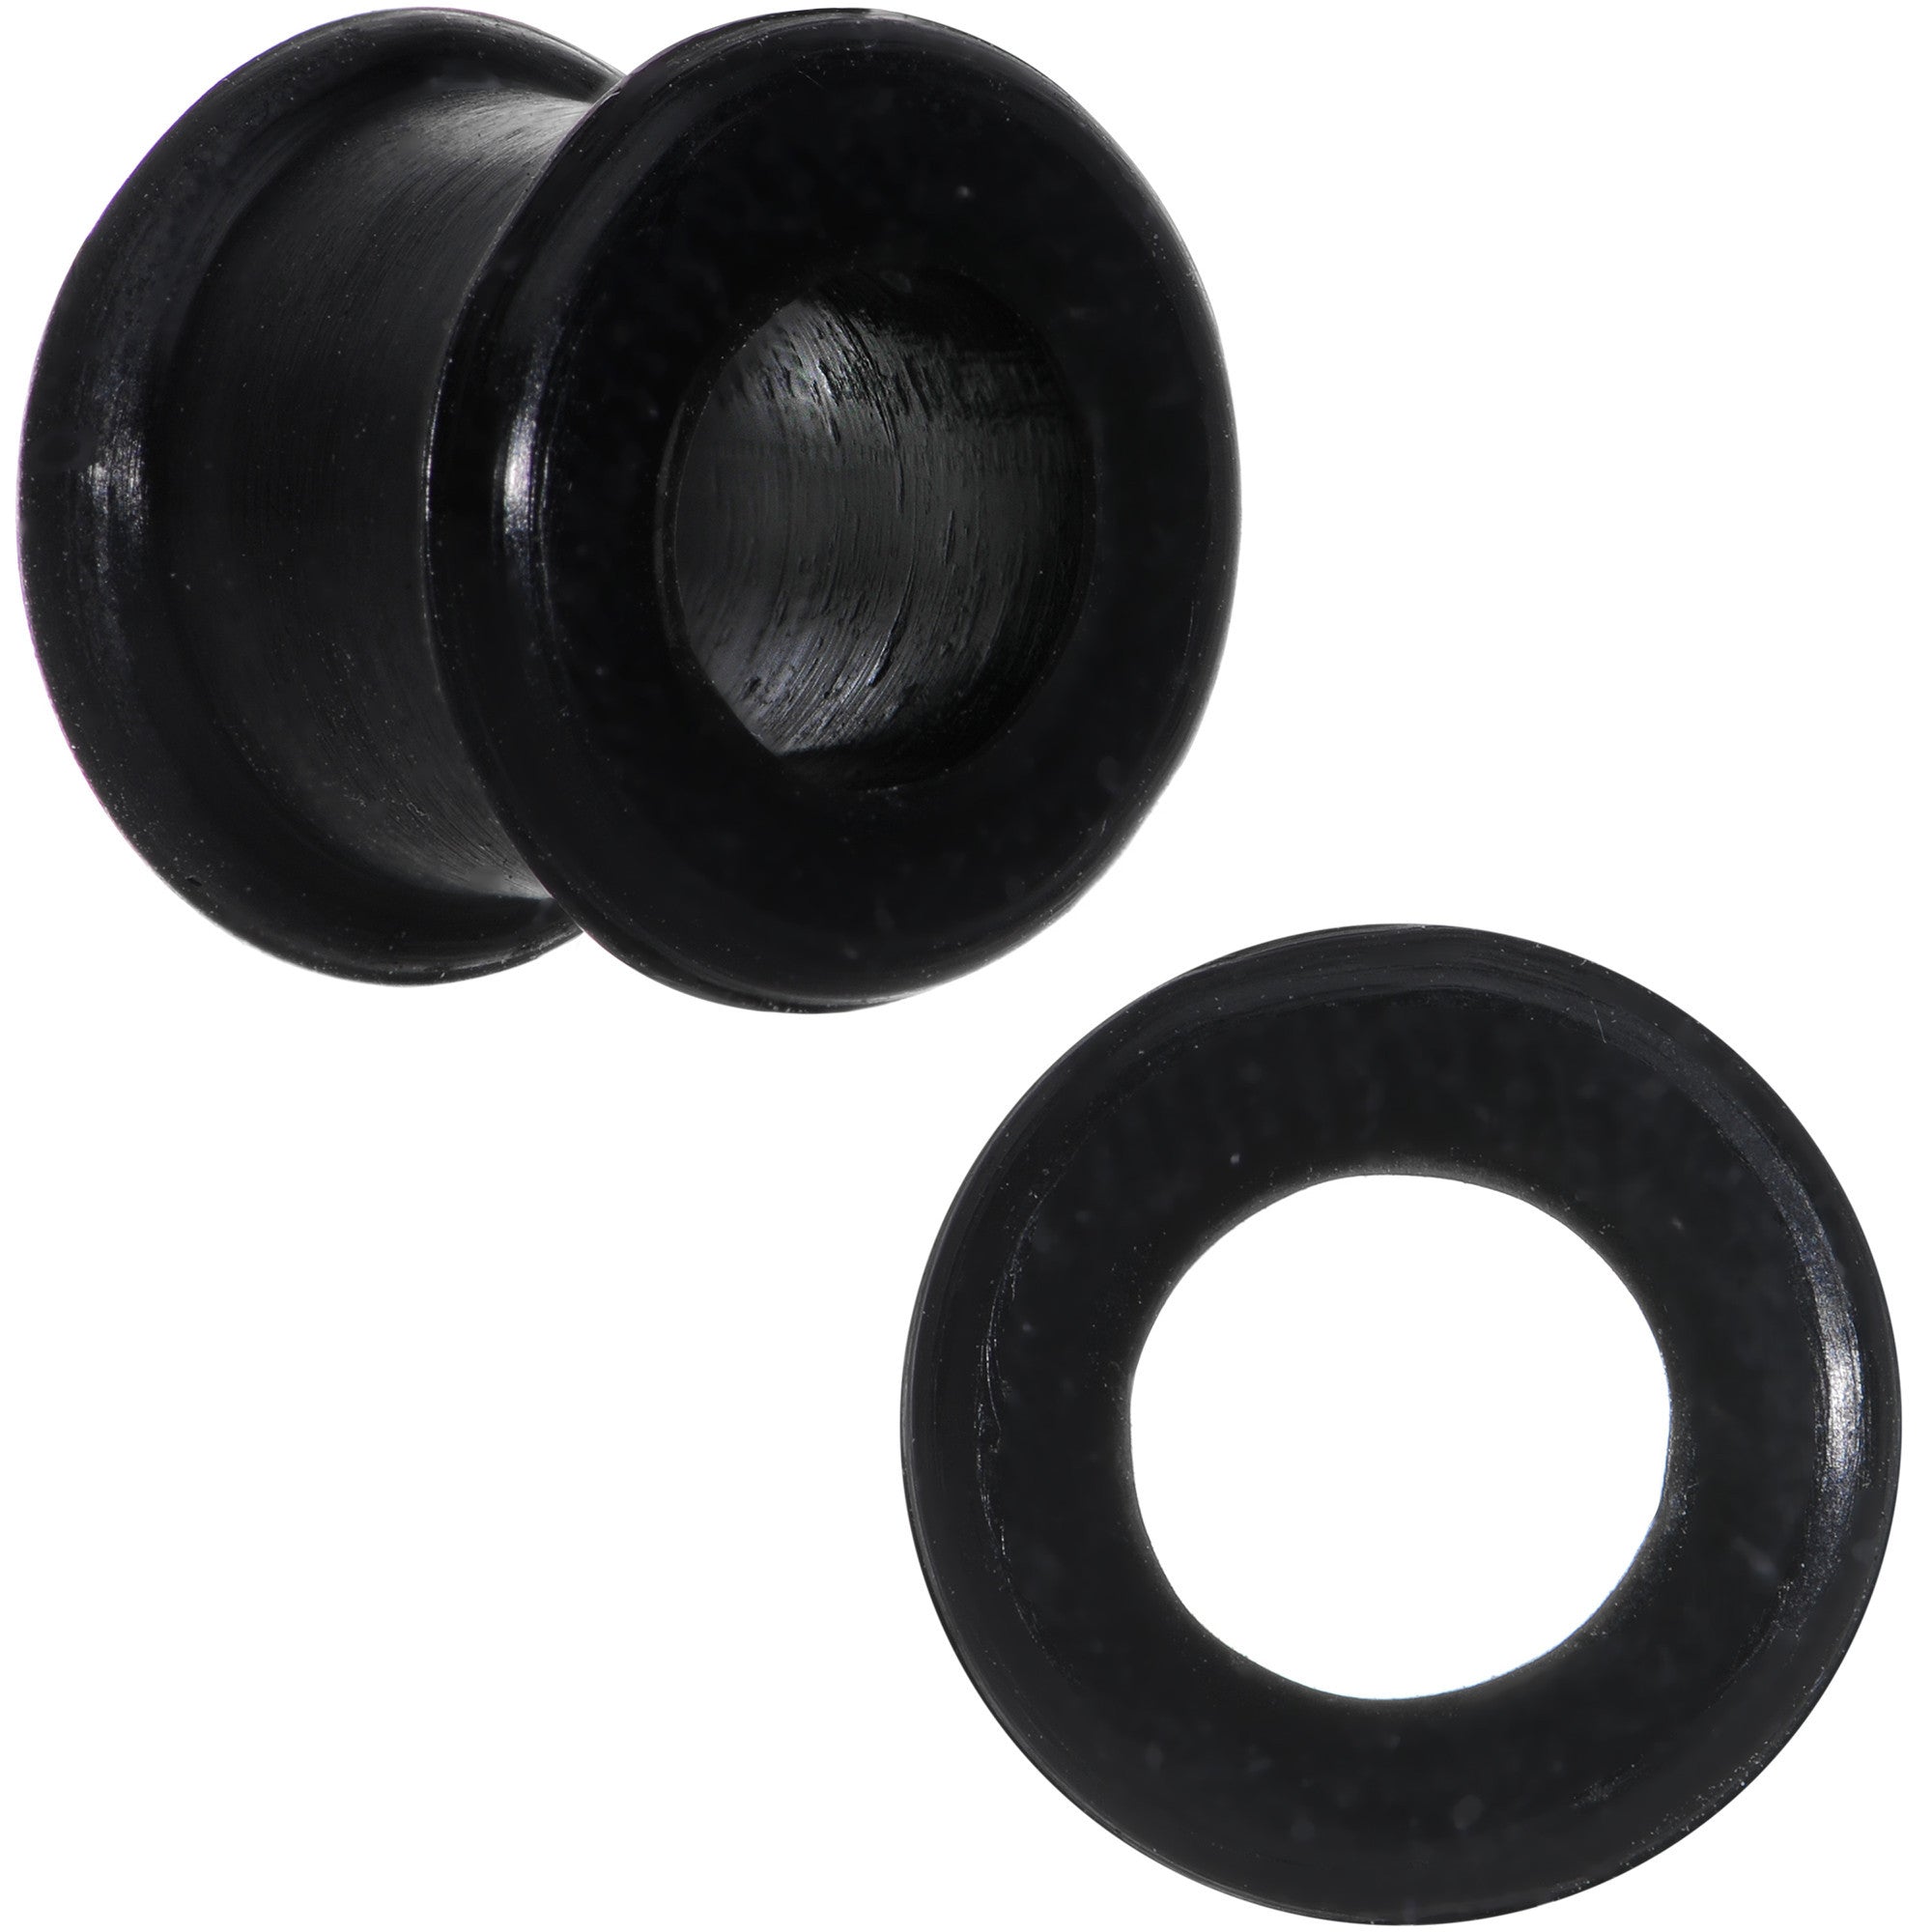 ZS 1 Pair Double Flare Ear Tunnel Plugs Expander Screw Fit Ear Stretching  Black Tapers and Plugs Earring Piercing - Walmart.com